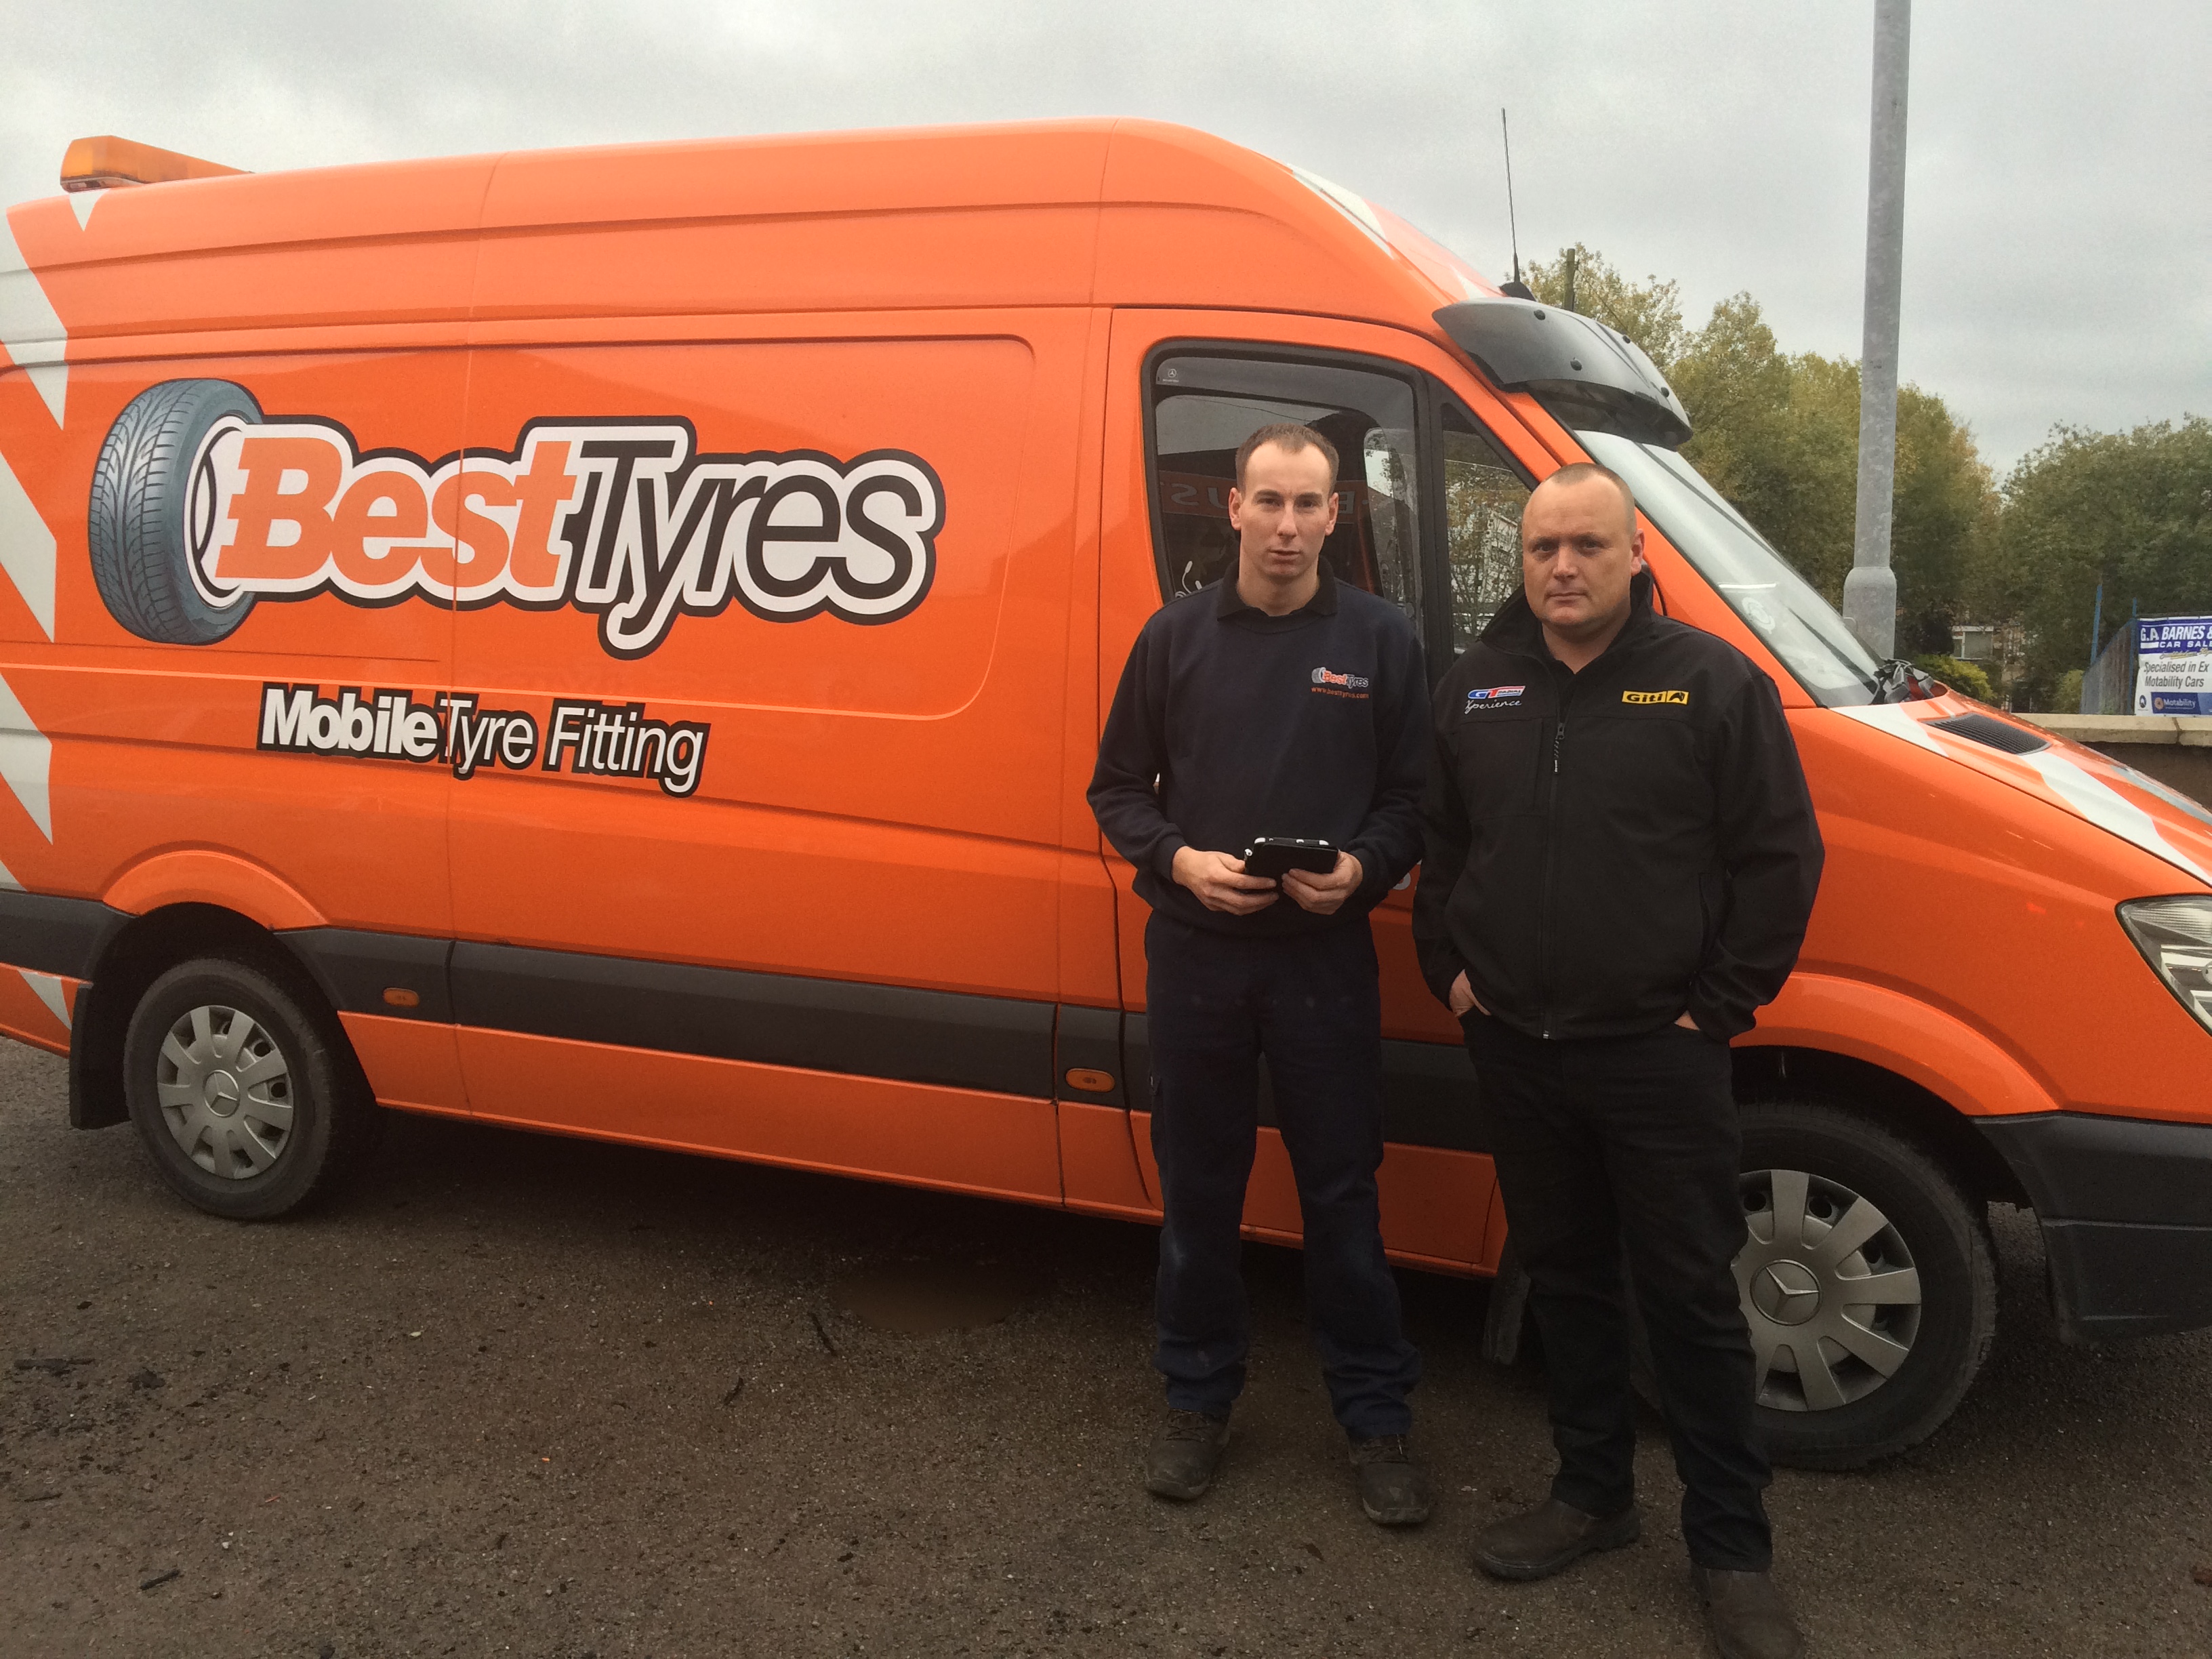 Best Tyres using CAM’s e-jobsheet for increased ‘professionalism’, ‘responsiveness’